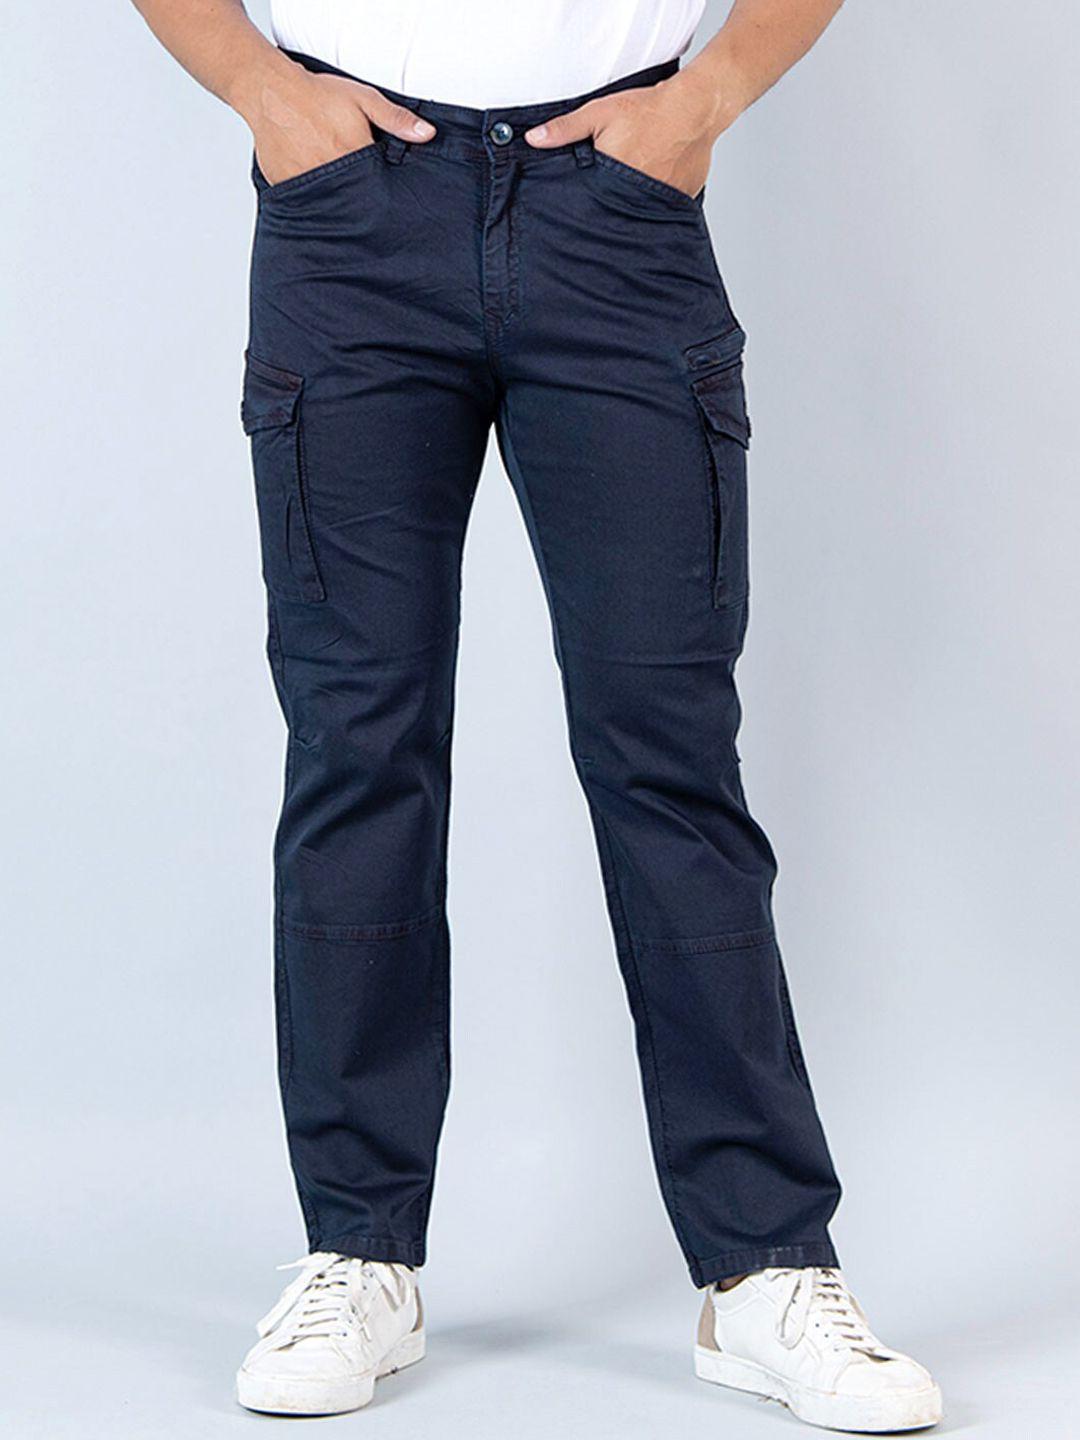 tistabene men relaxed twill cotton cargos trousers